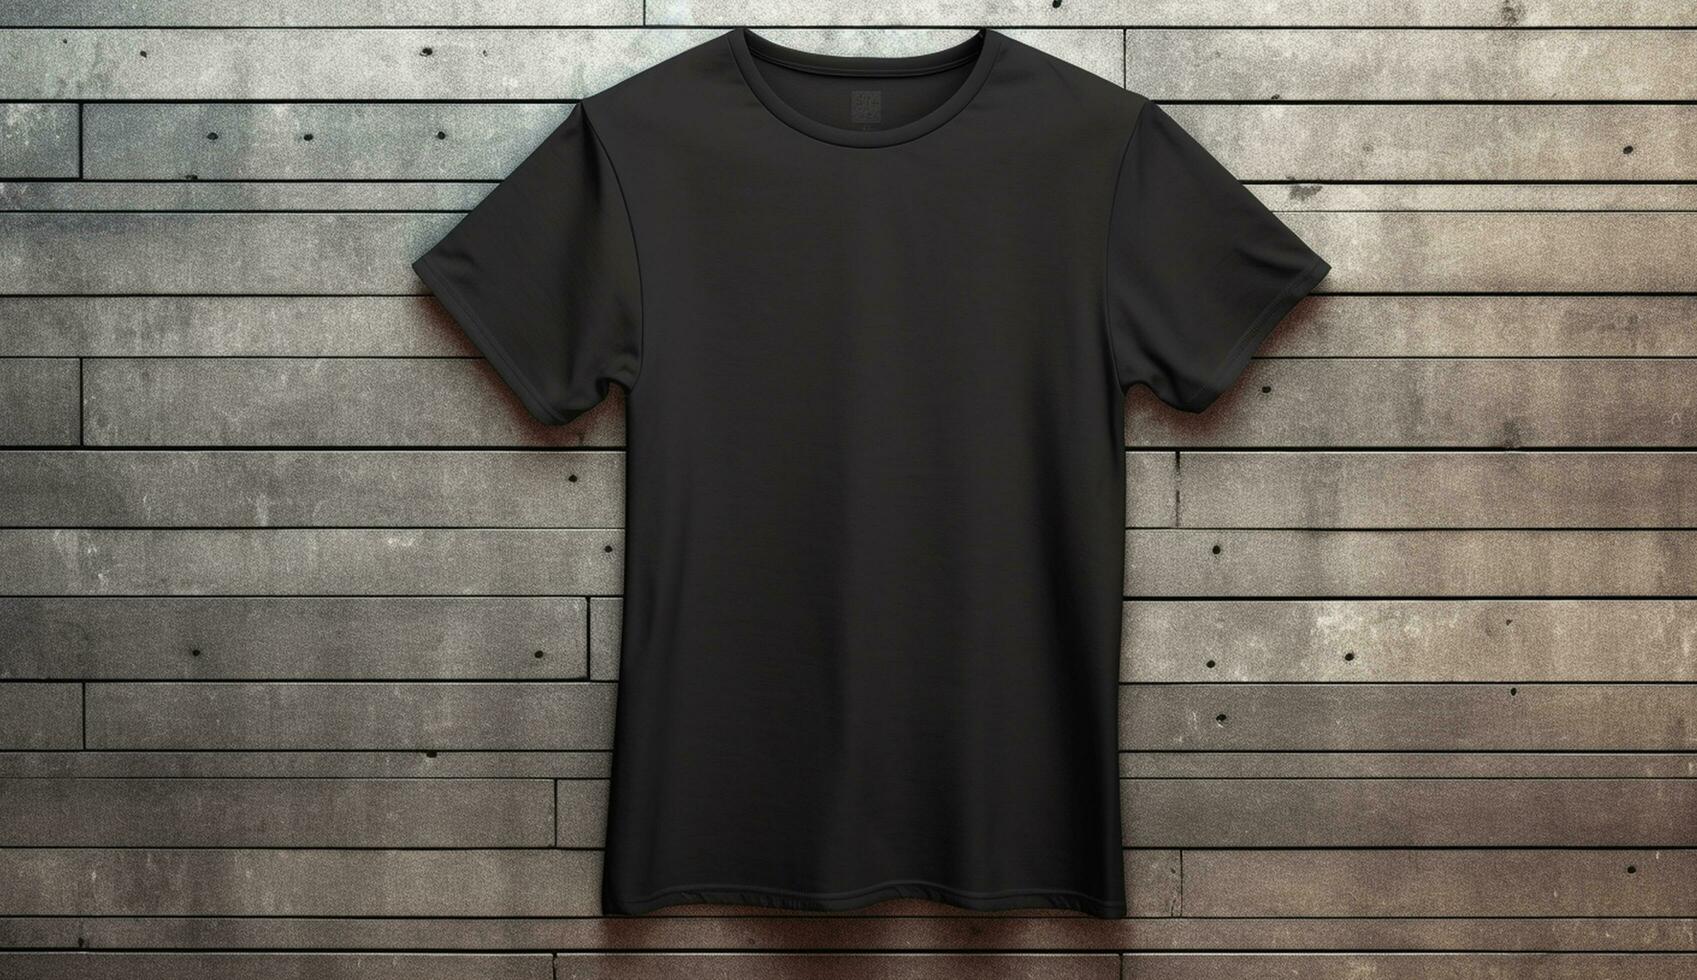 Blank T shirt photo for mockup design 26047626 Stock Photo at Vecteezy